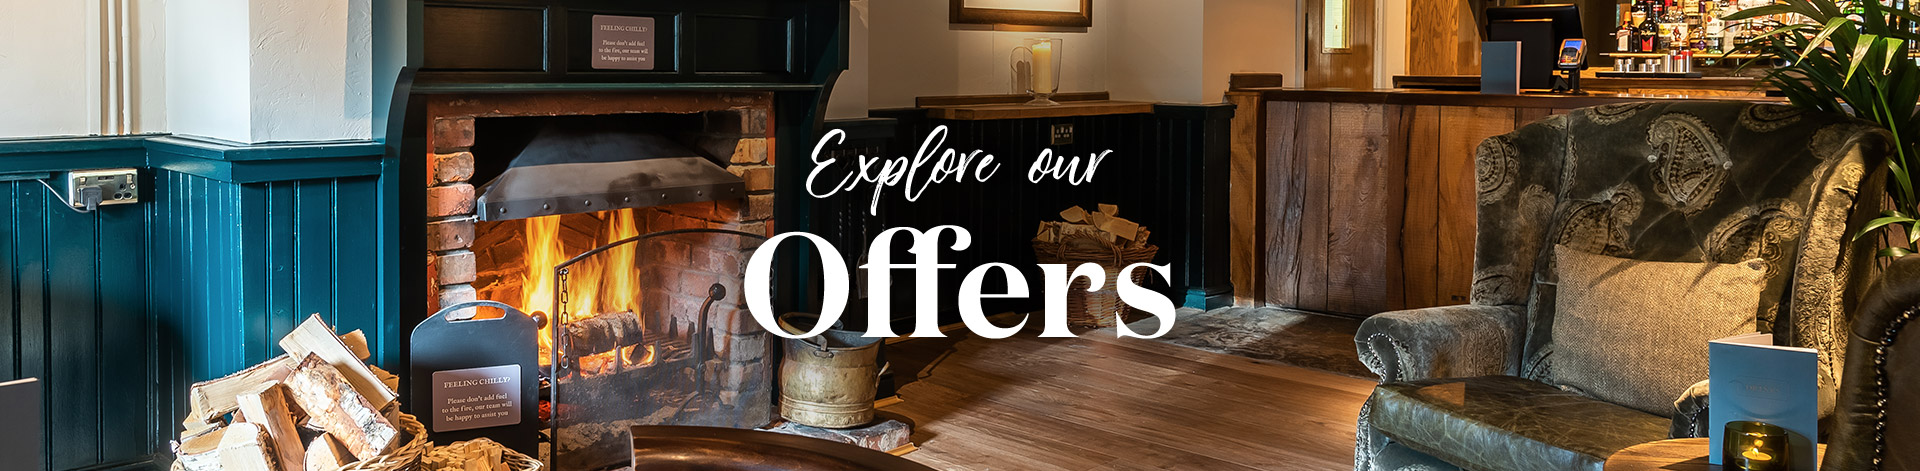 Our latest offers at The Snowy Owl